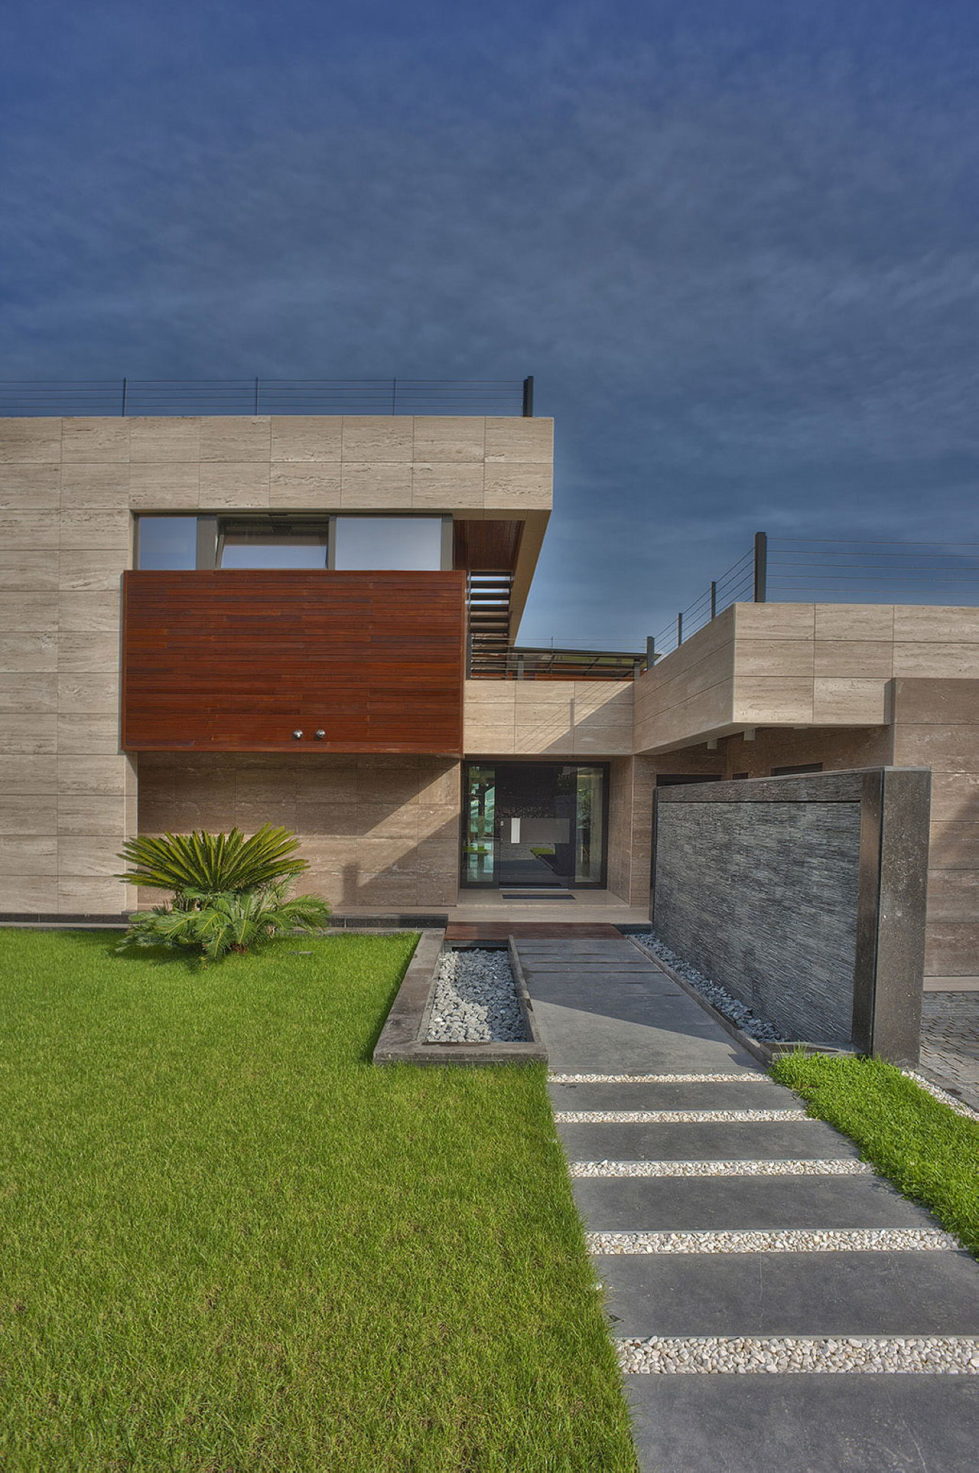 S, M, L - Villa In Montenegro From Studio SYNTHESIS 15